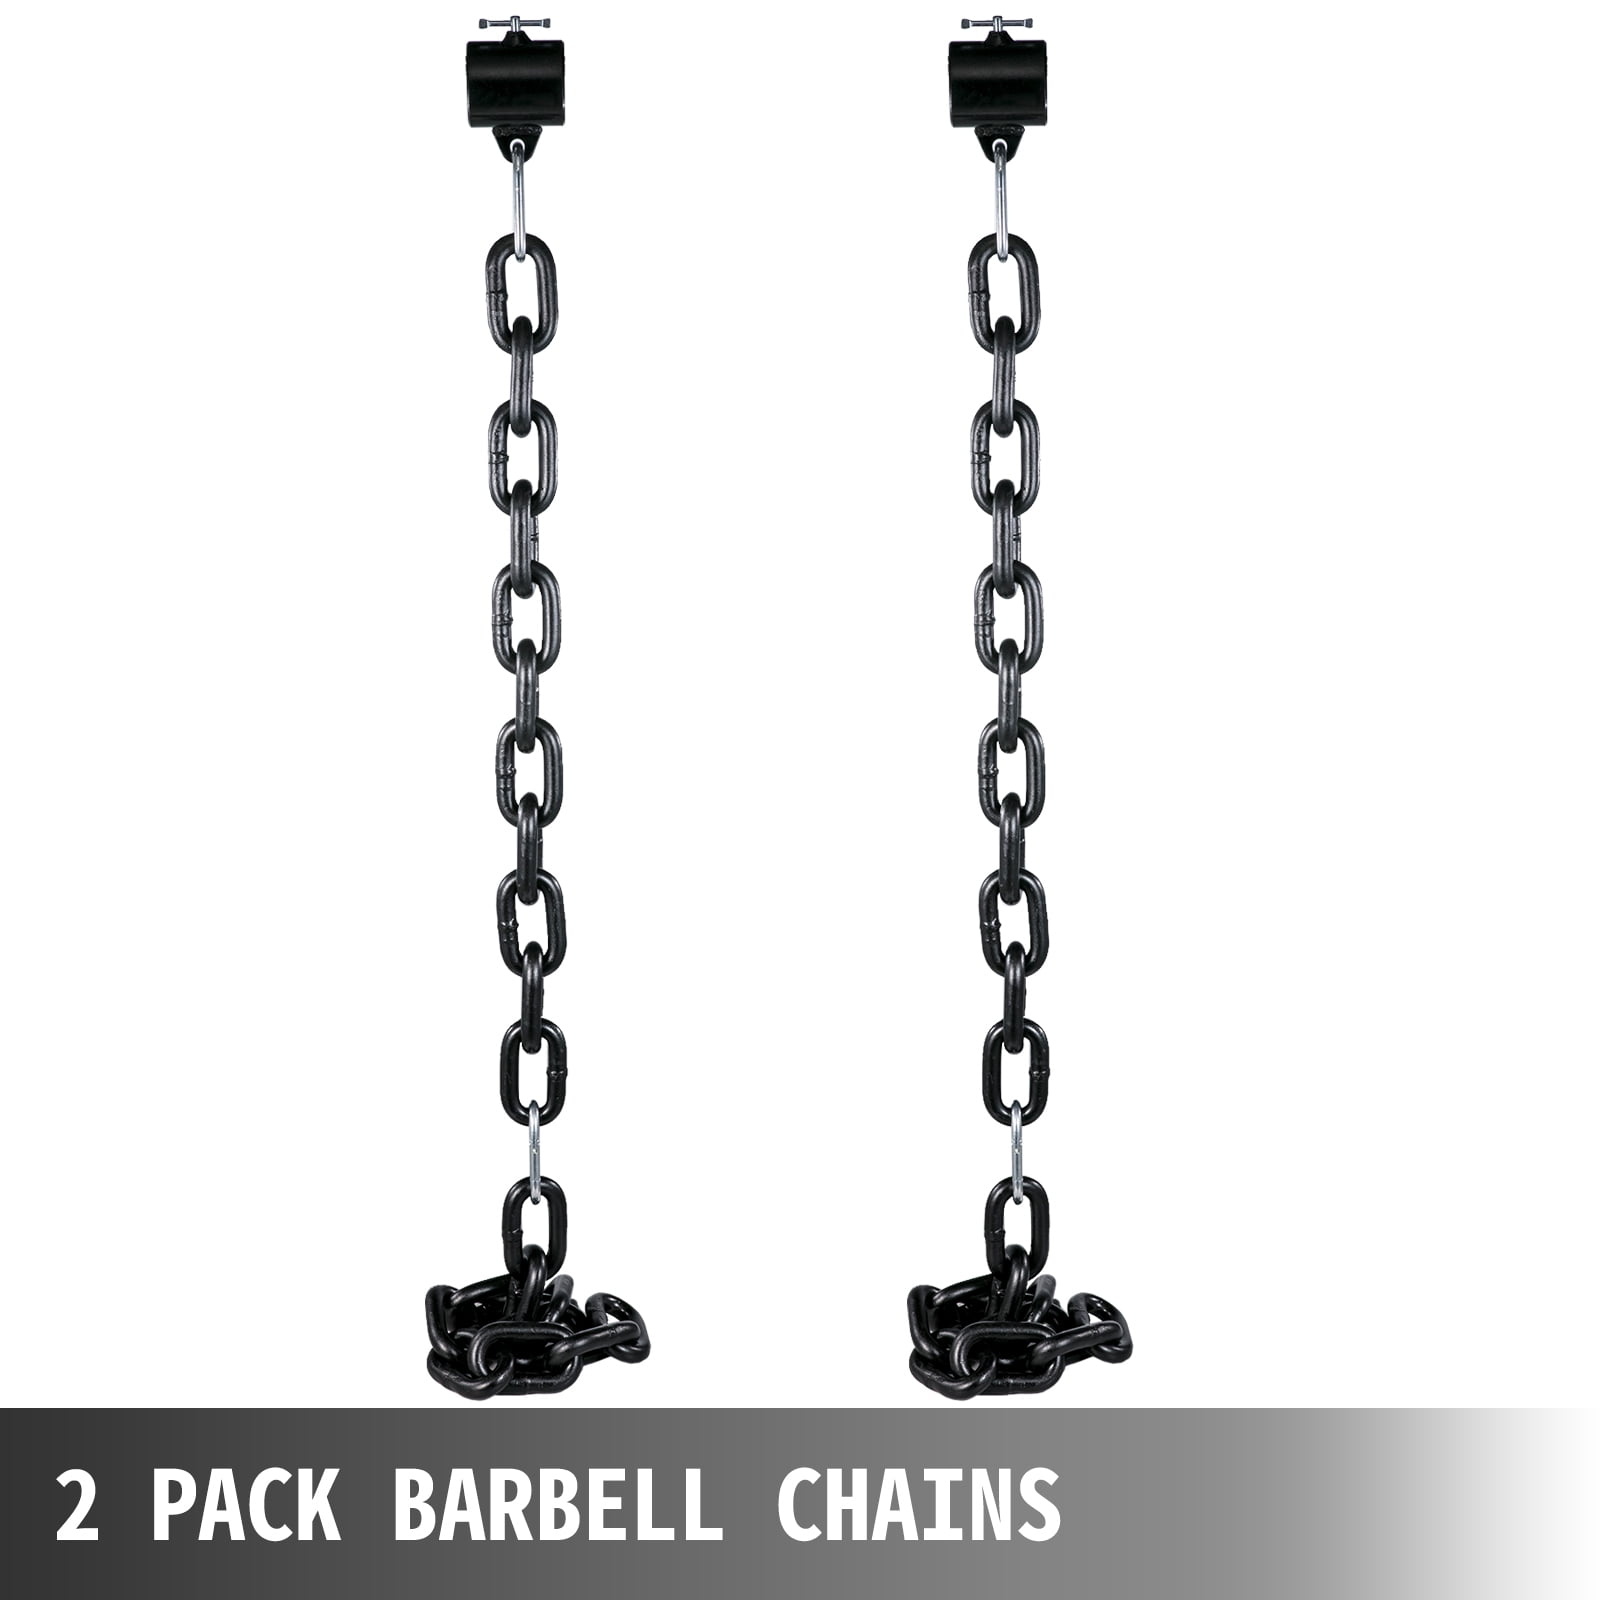 A Pair Weight Lifting Chains 26LBS 1.6m each Weight-bearing Training w/ Collars 